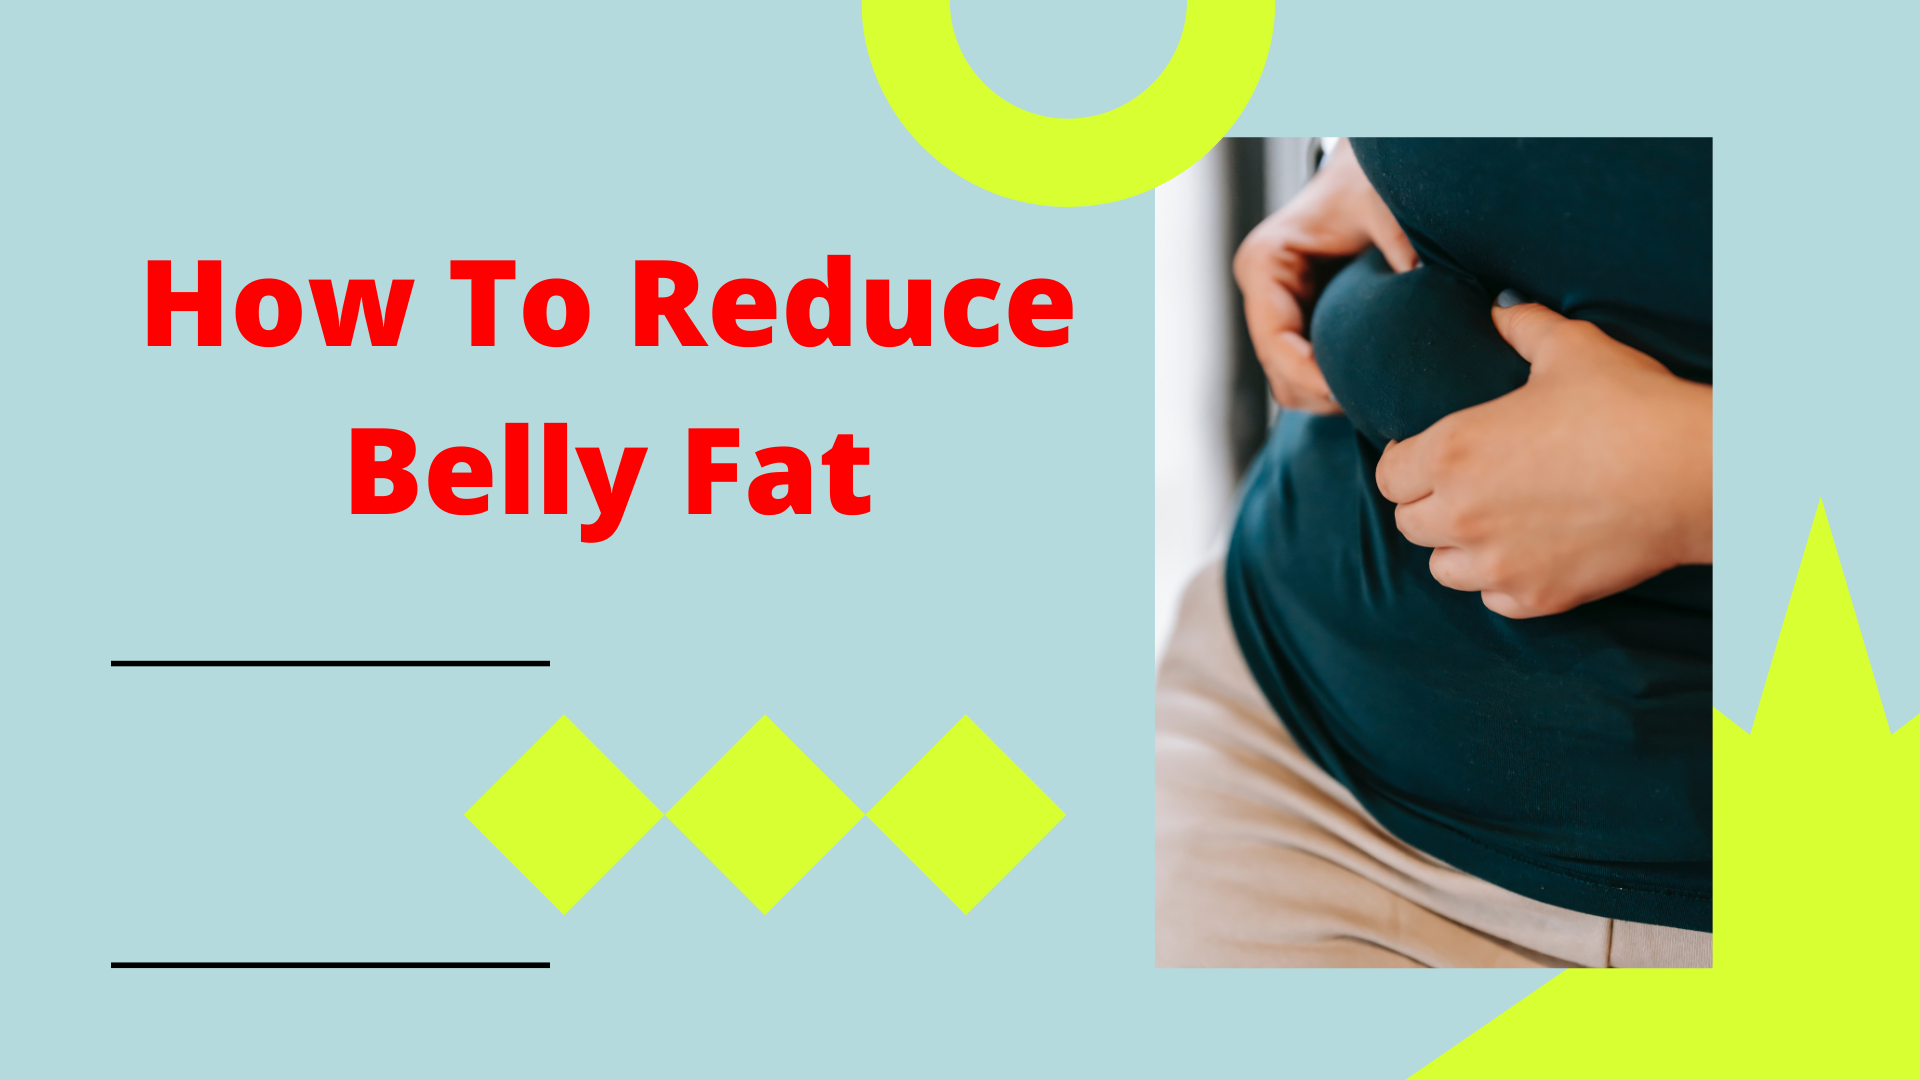 How To Reduce Belly